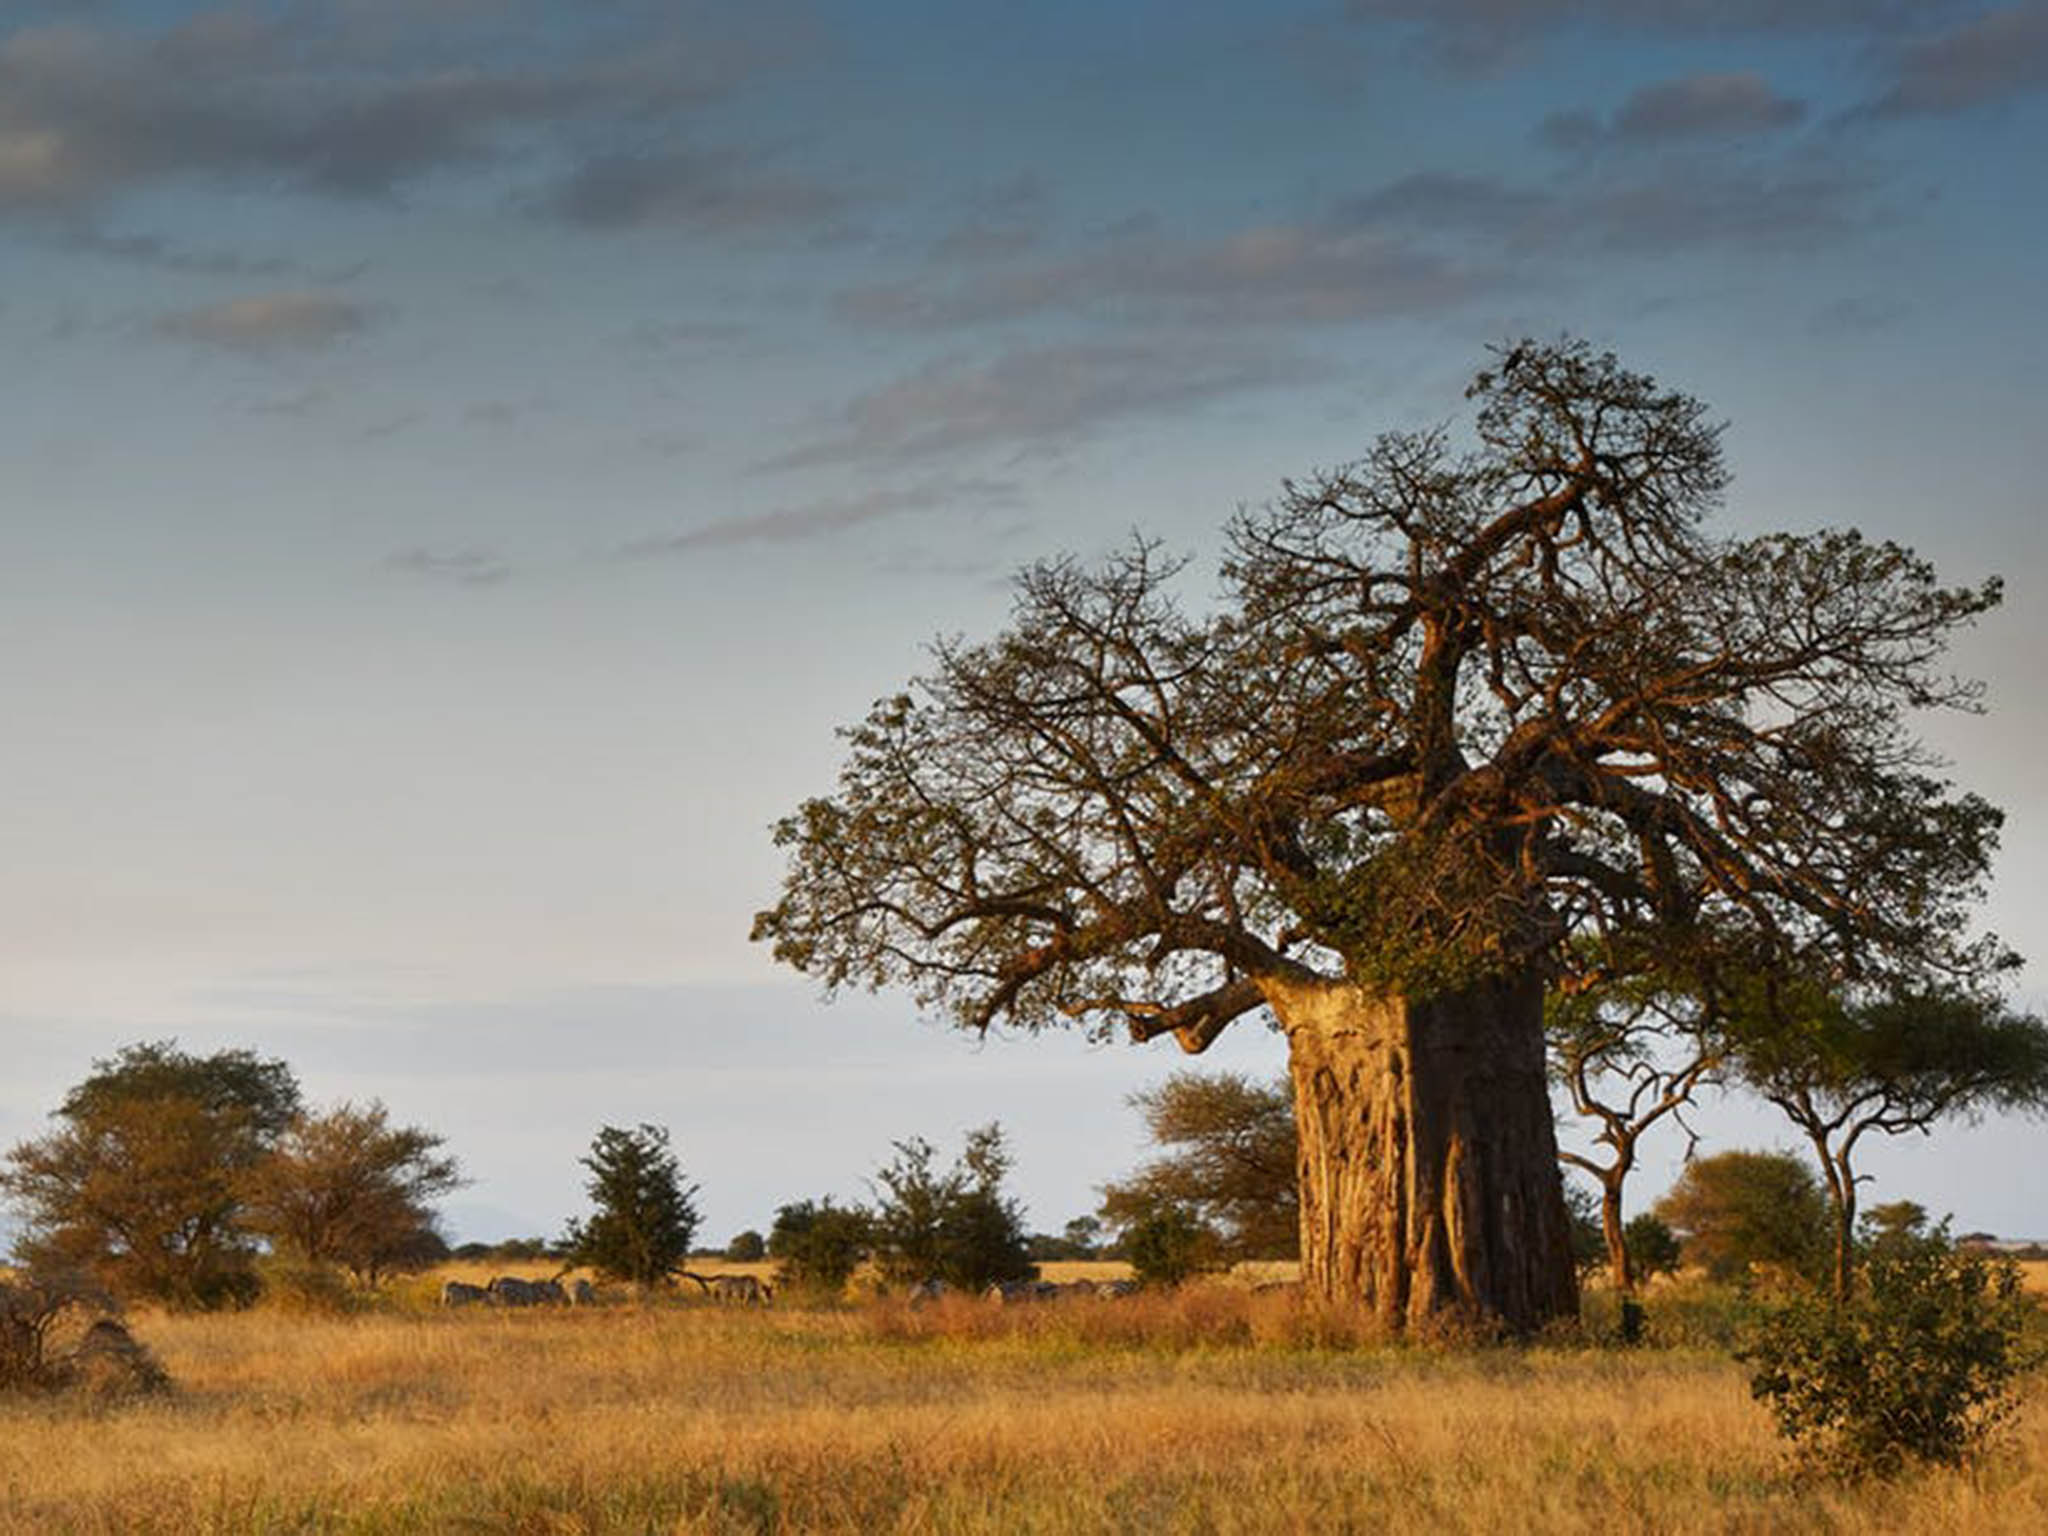 With over 300 uses, a shady canopy and a store of water, baobabs act as an oasis for humans and other animals